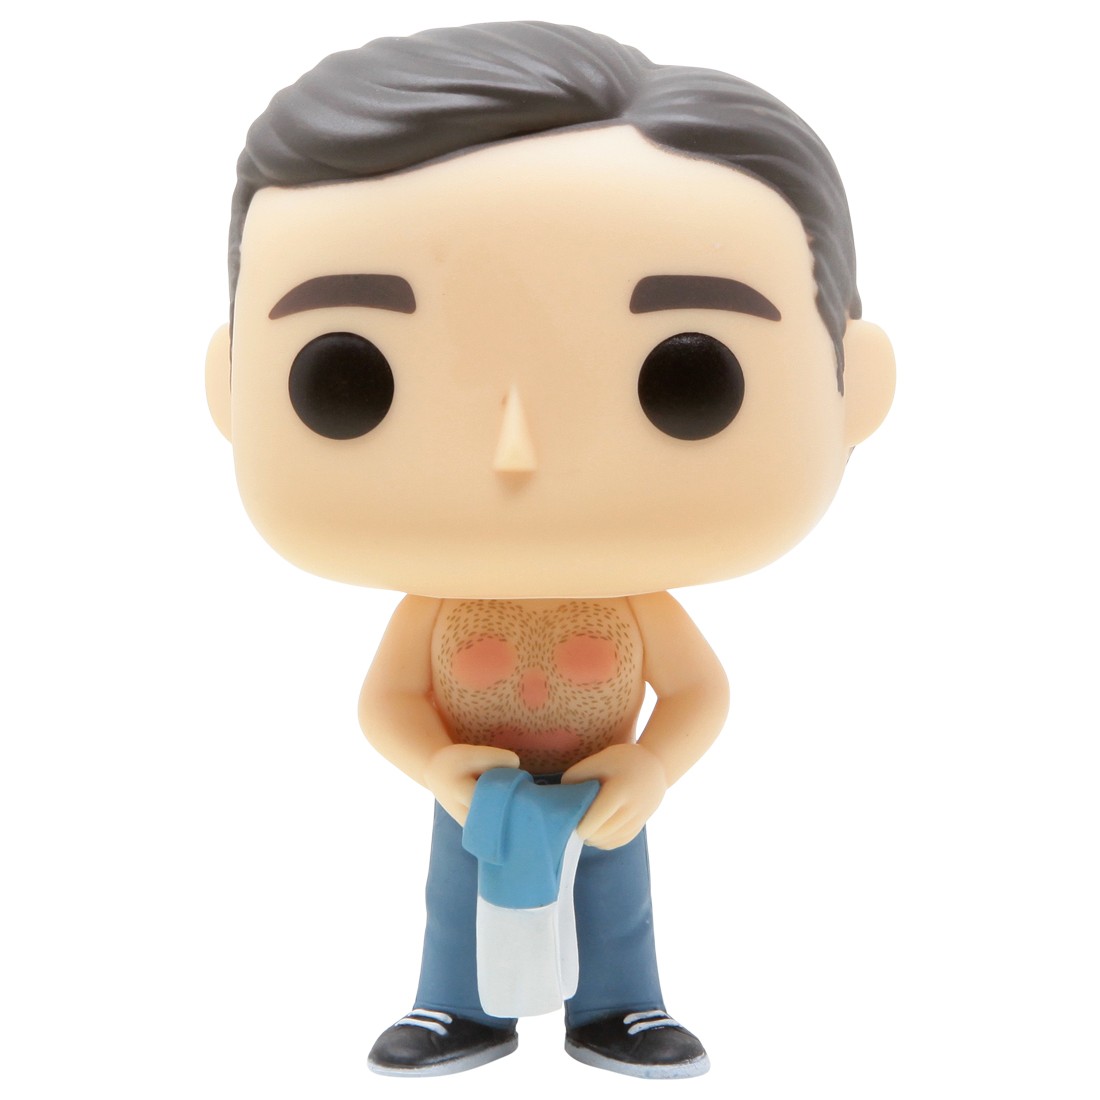 40 Year Old Virgin Movies Andy Holding Oscar 10644 54469 In stock Funko Pop 